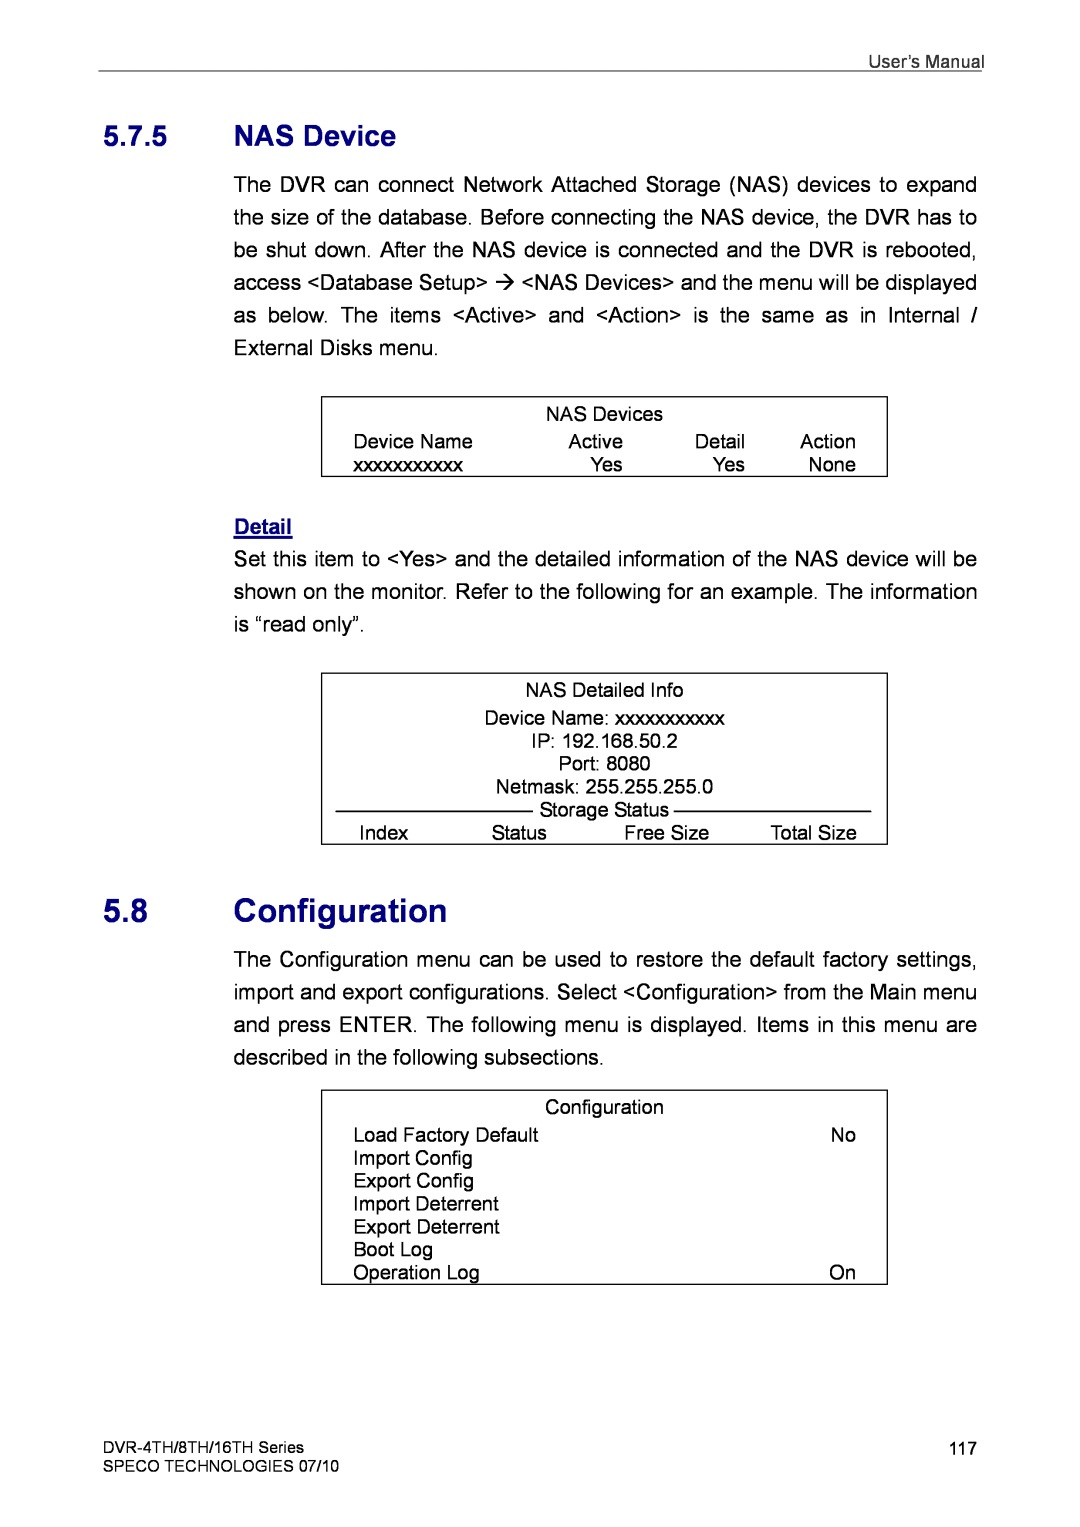 Speco Technologies 4TH, 8TH, 16TH user manual Configuration, NAS Device 